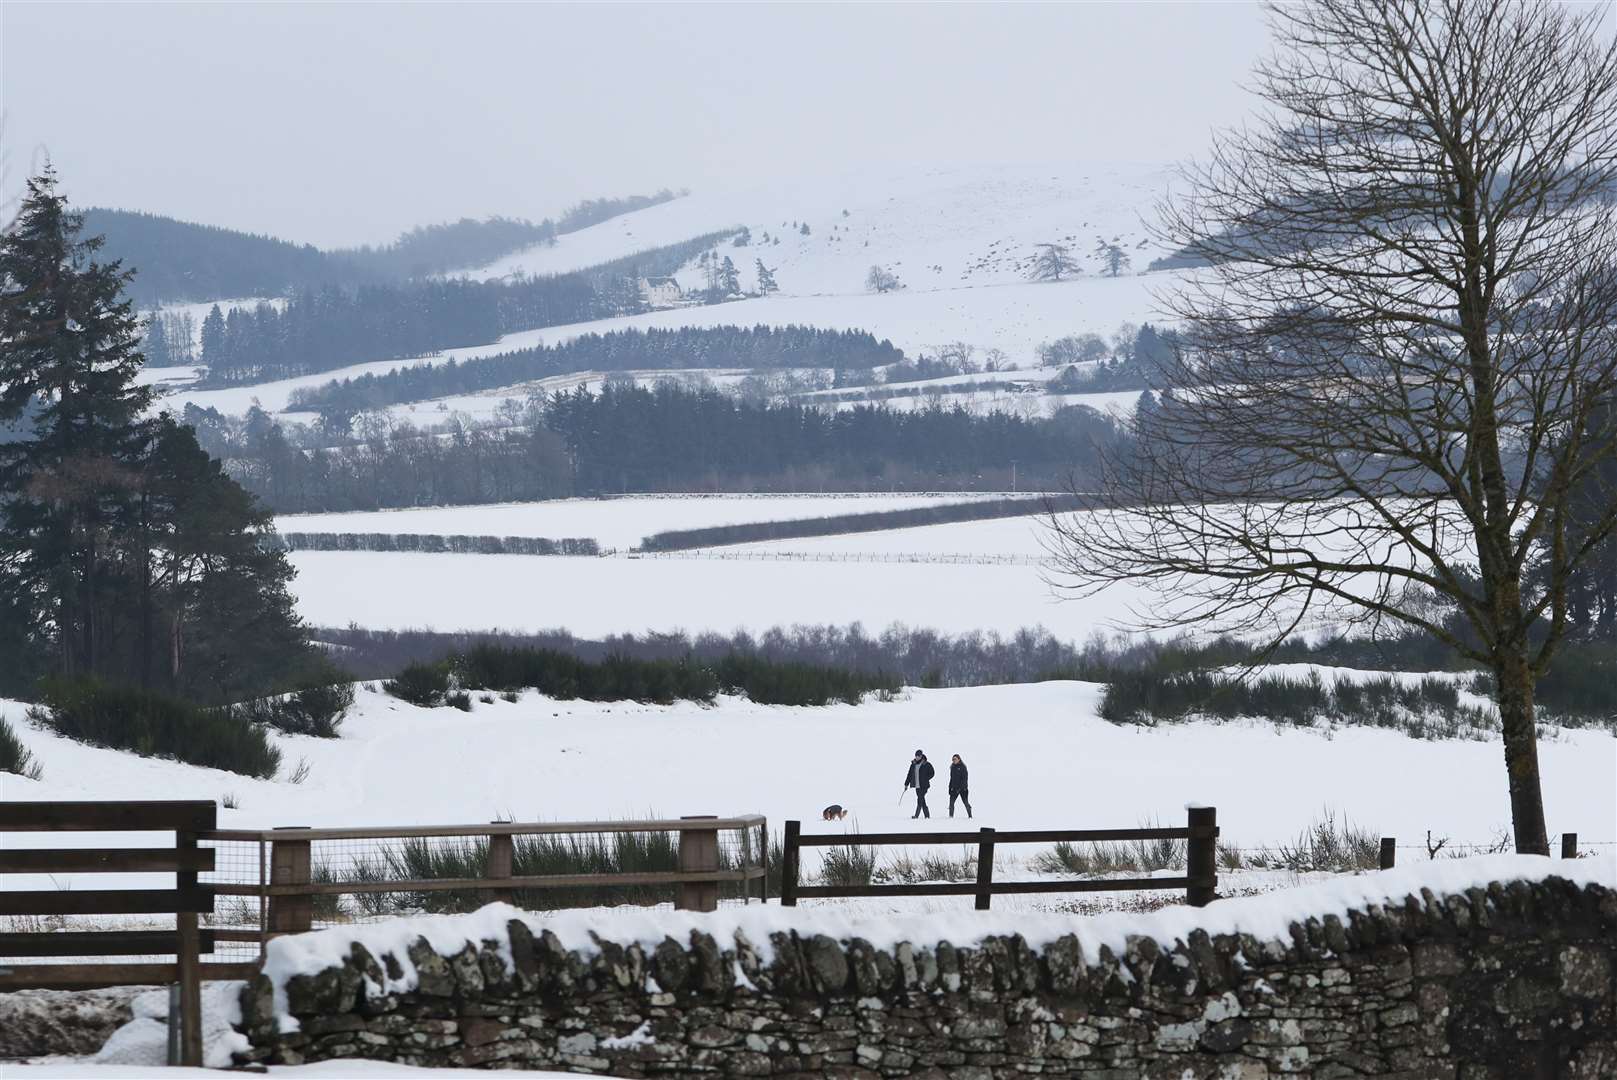 People walk in the snow at Gleneagles in Auchterarder (Andrew Milligan/PA)